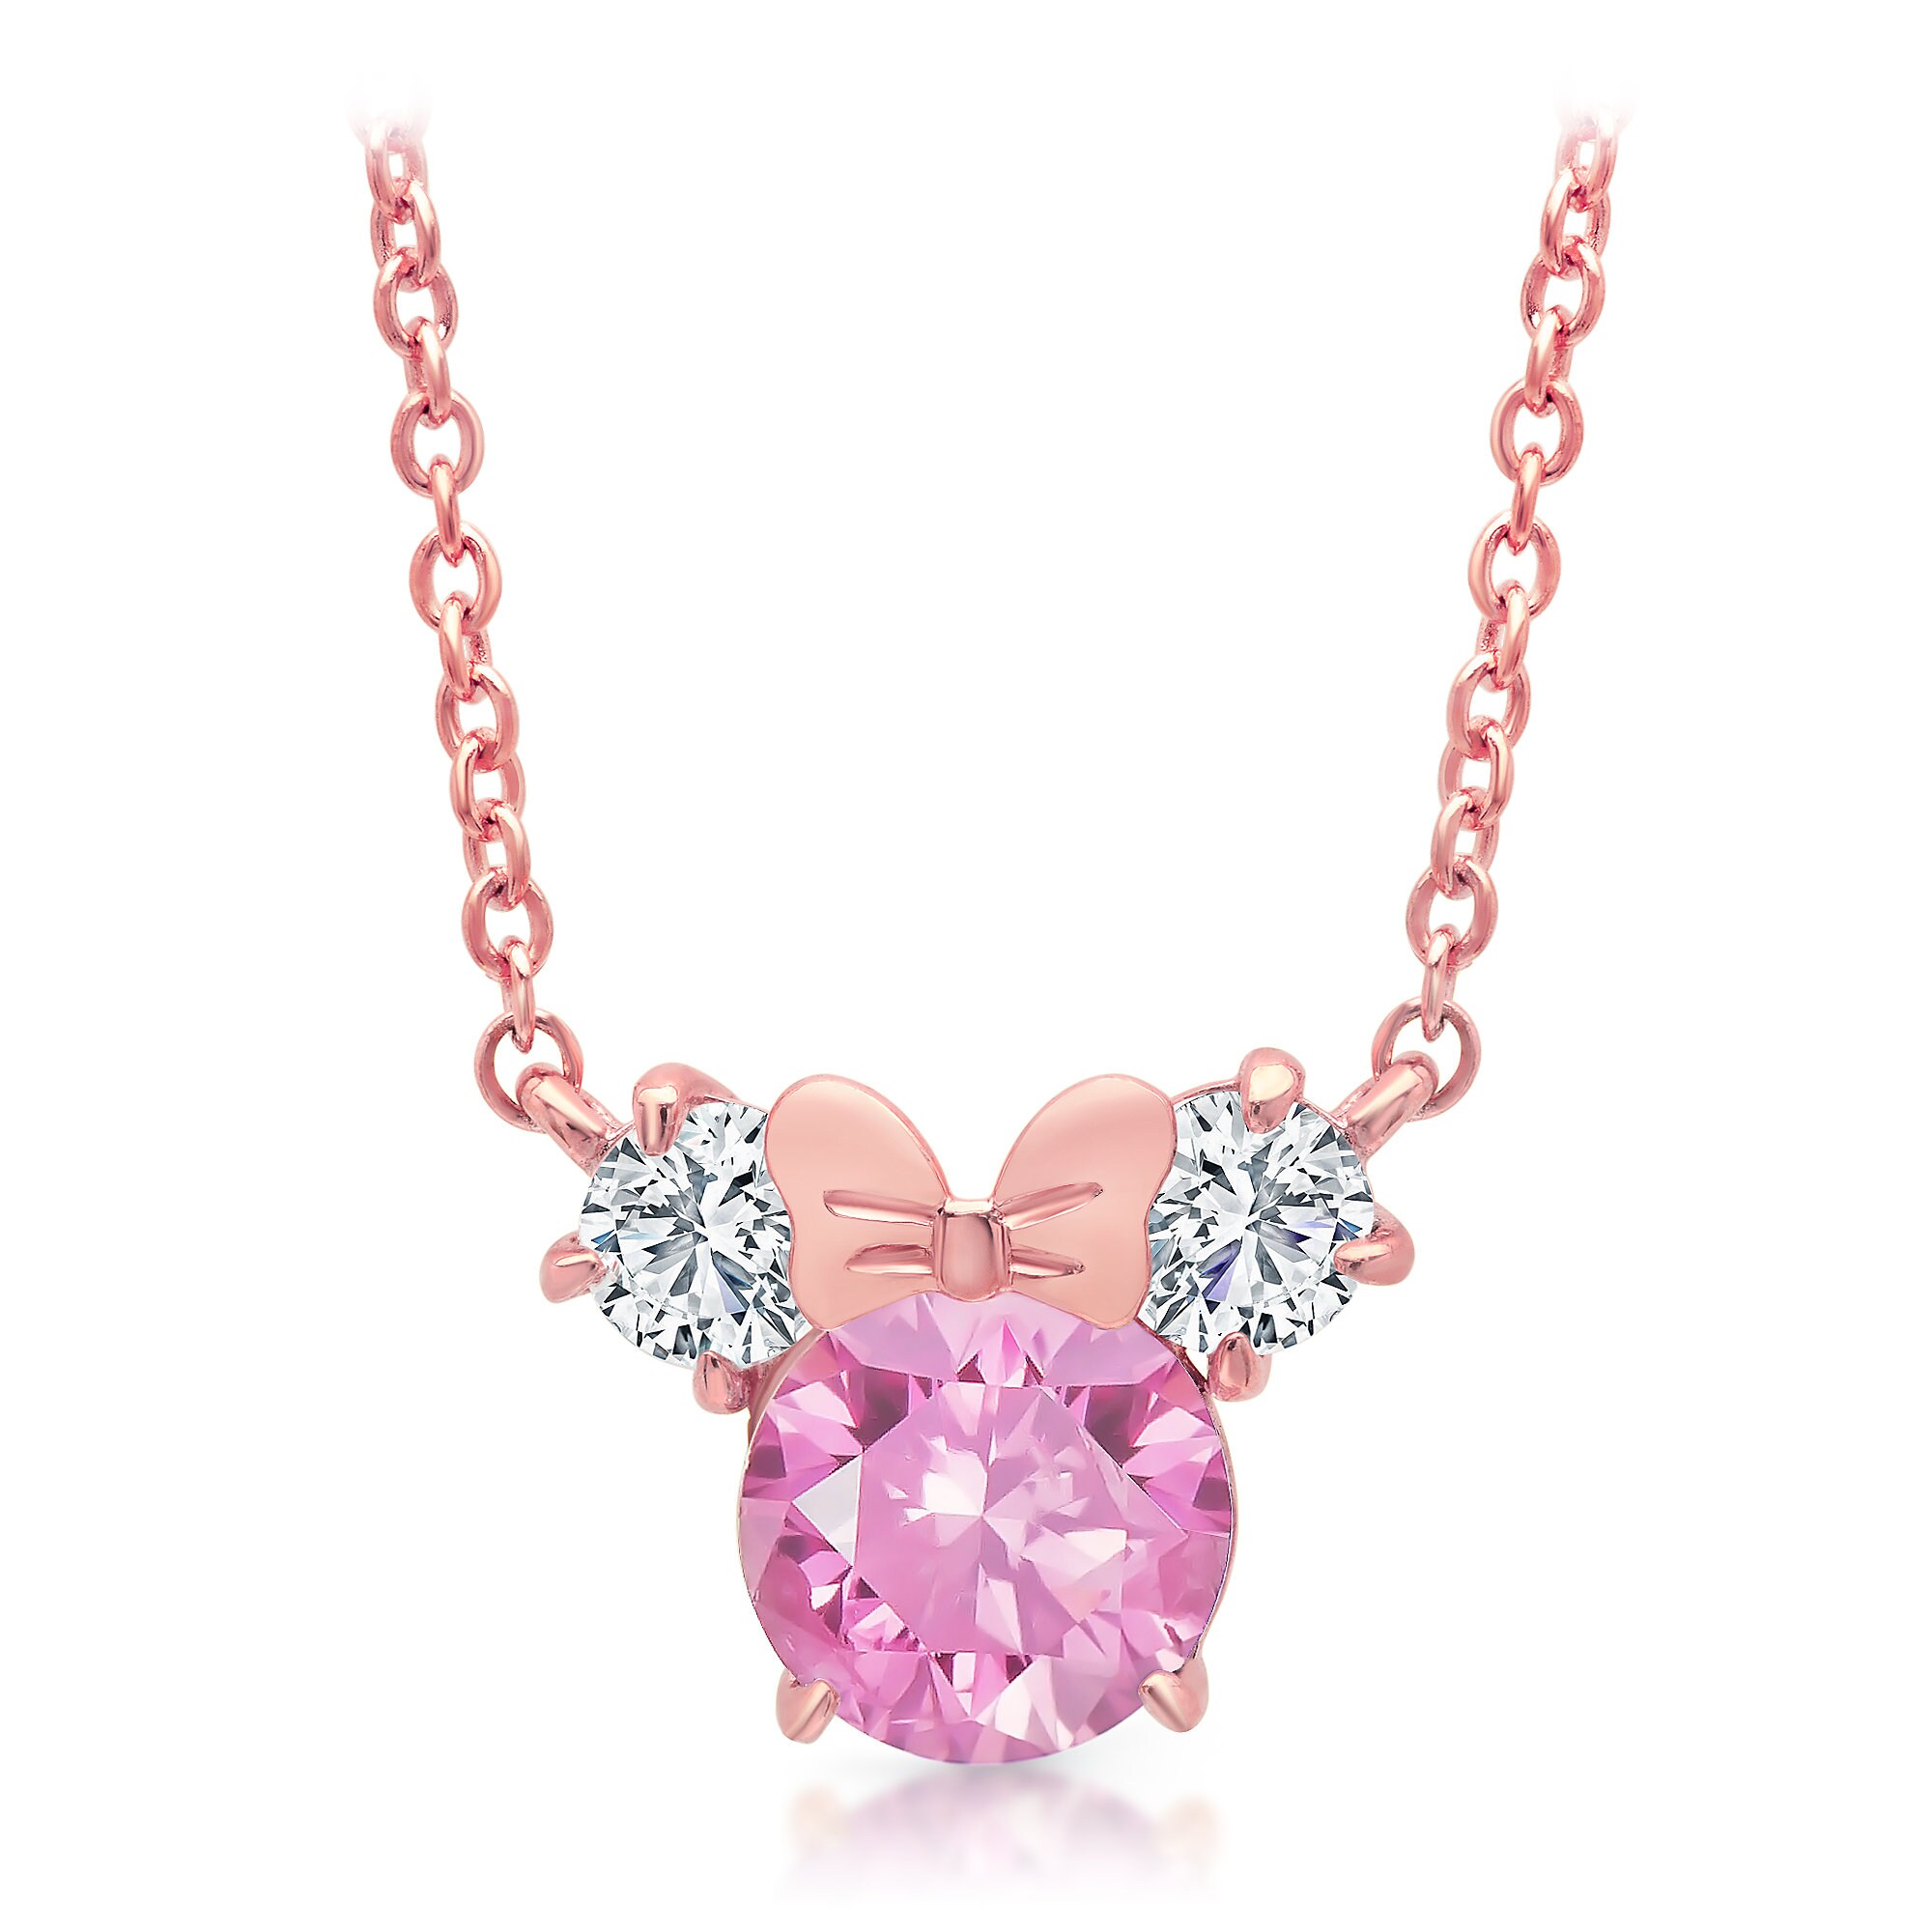 Minnie Mouse Necklace for Kids by CRISLU - Pink